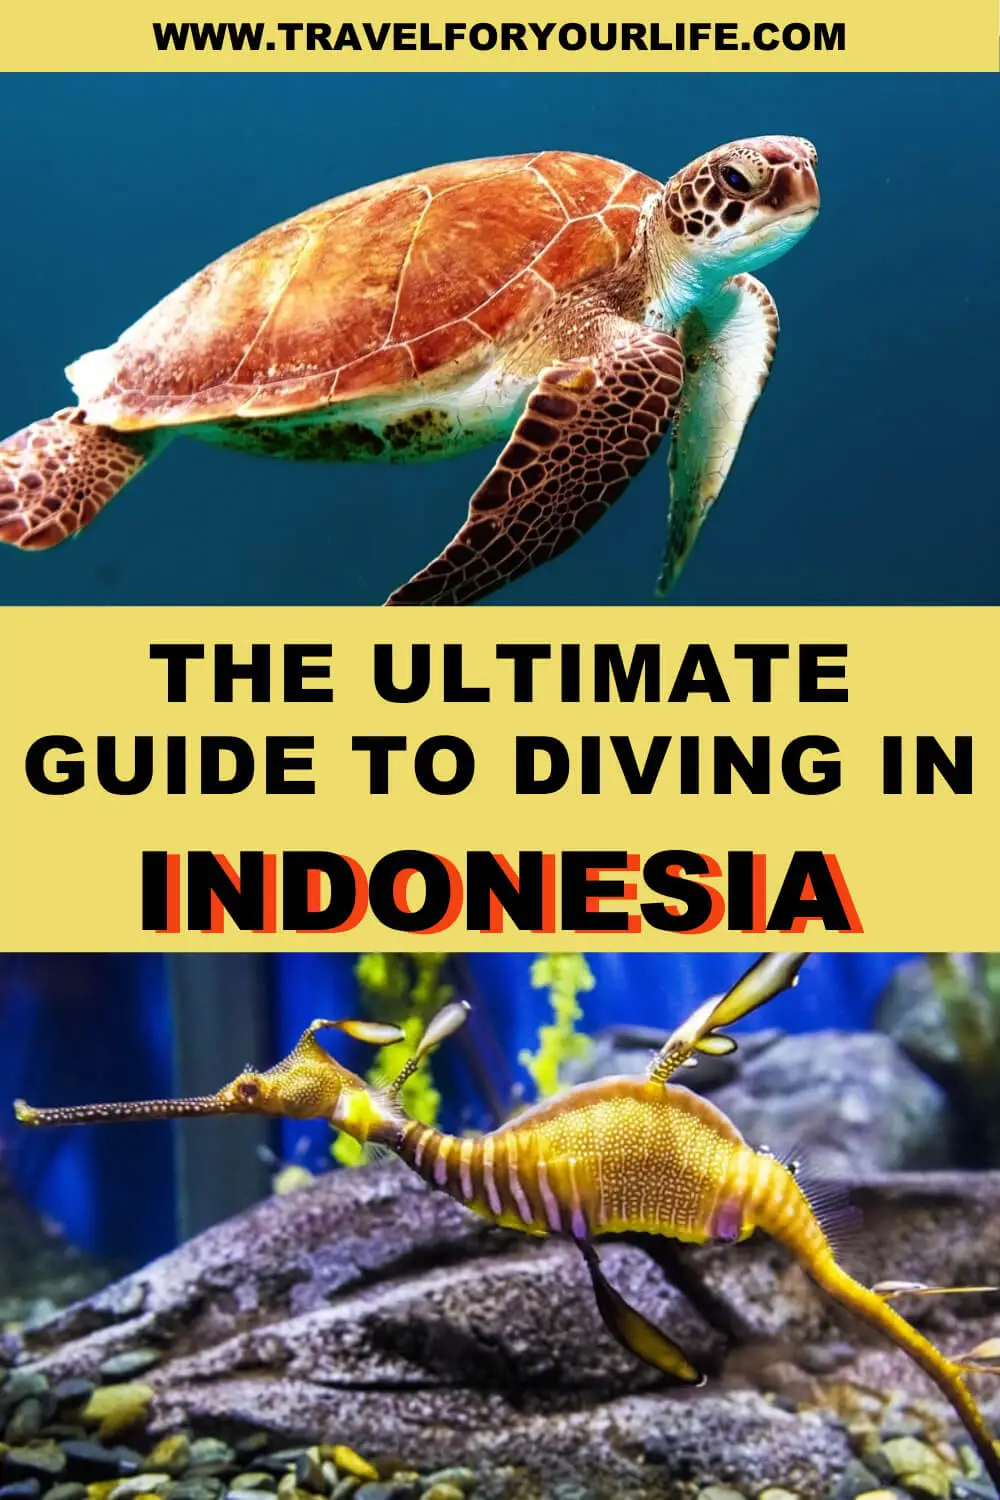 The ultimate guide to diving in Indonesia 2